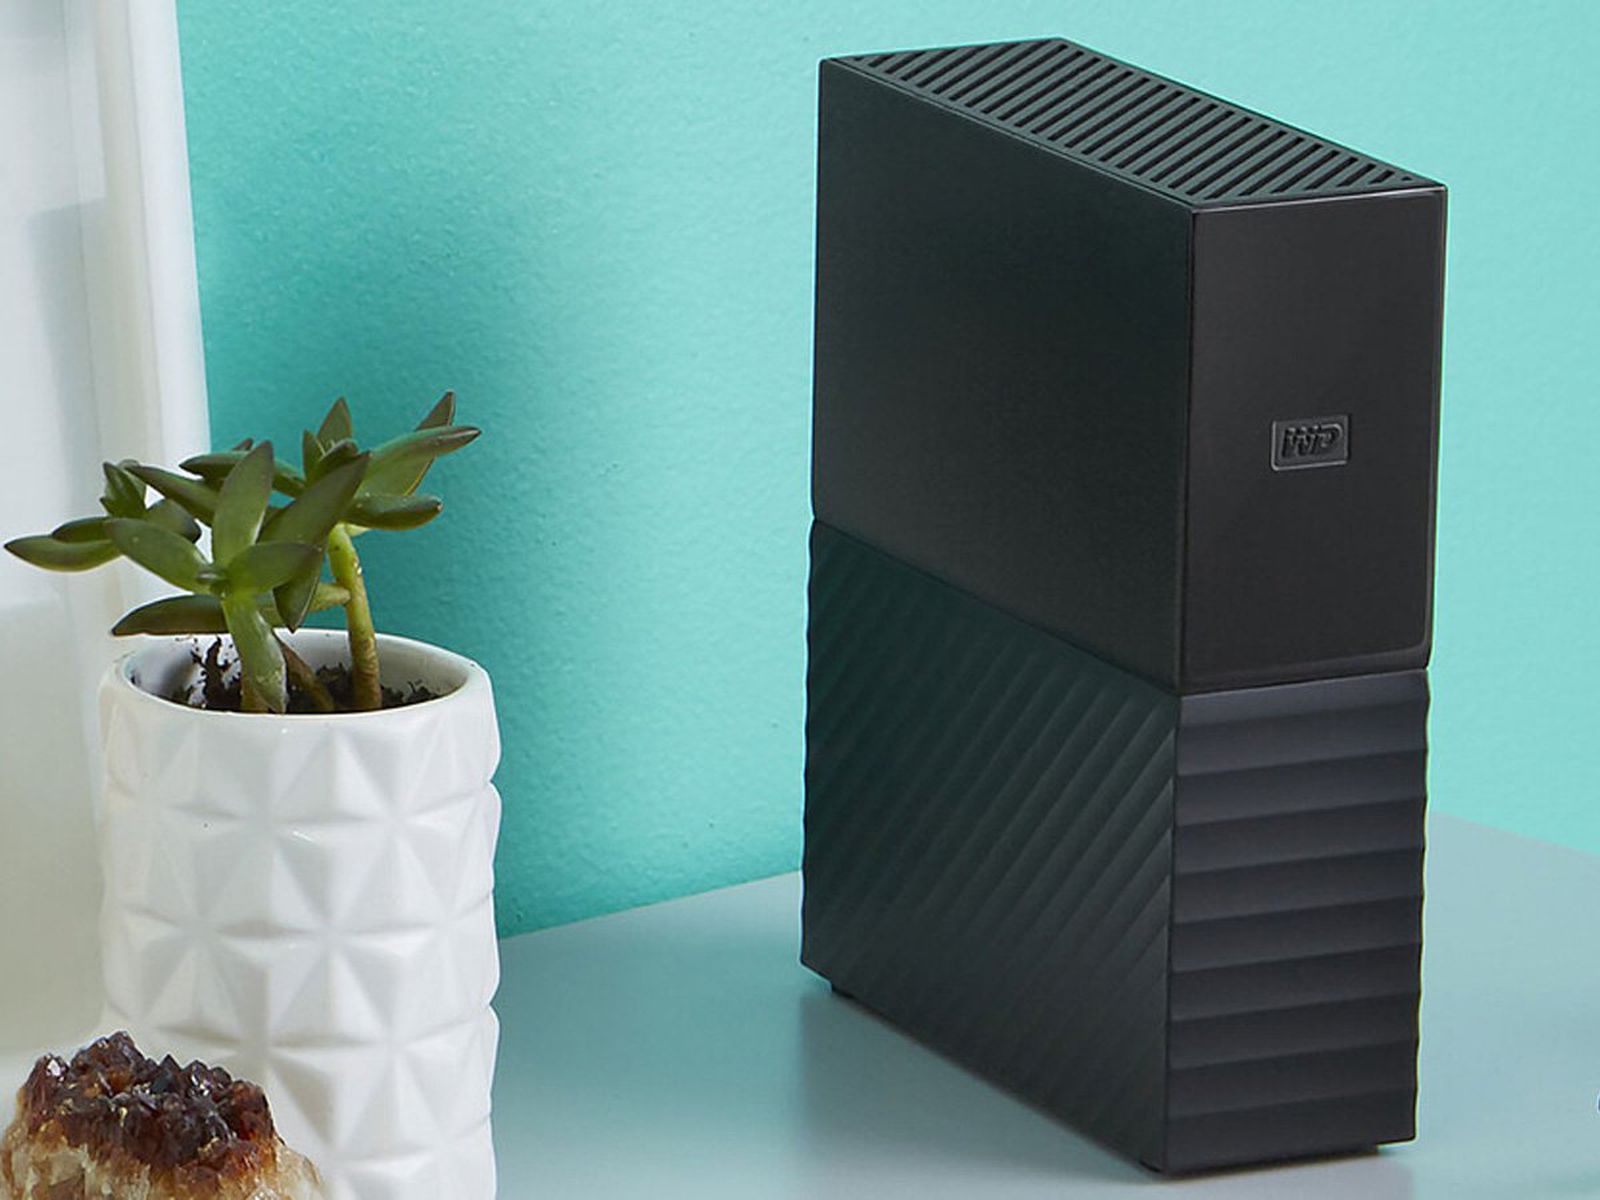 Western Digital Asks 'My Book Live' Device to Unplug After Reports of Remotely Wiped Drives - MacRumors